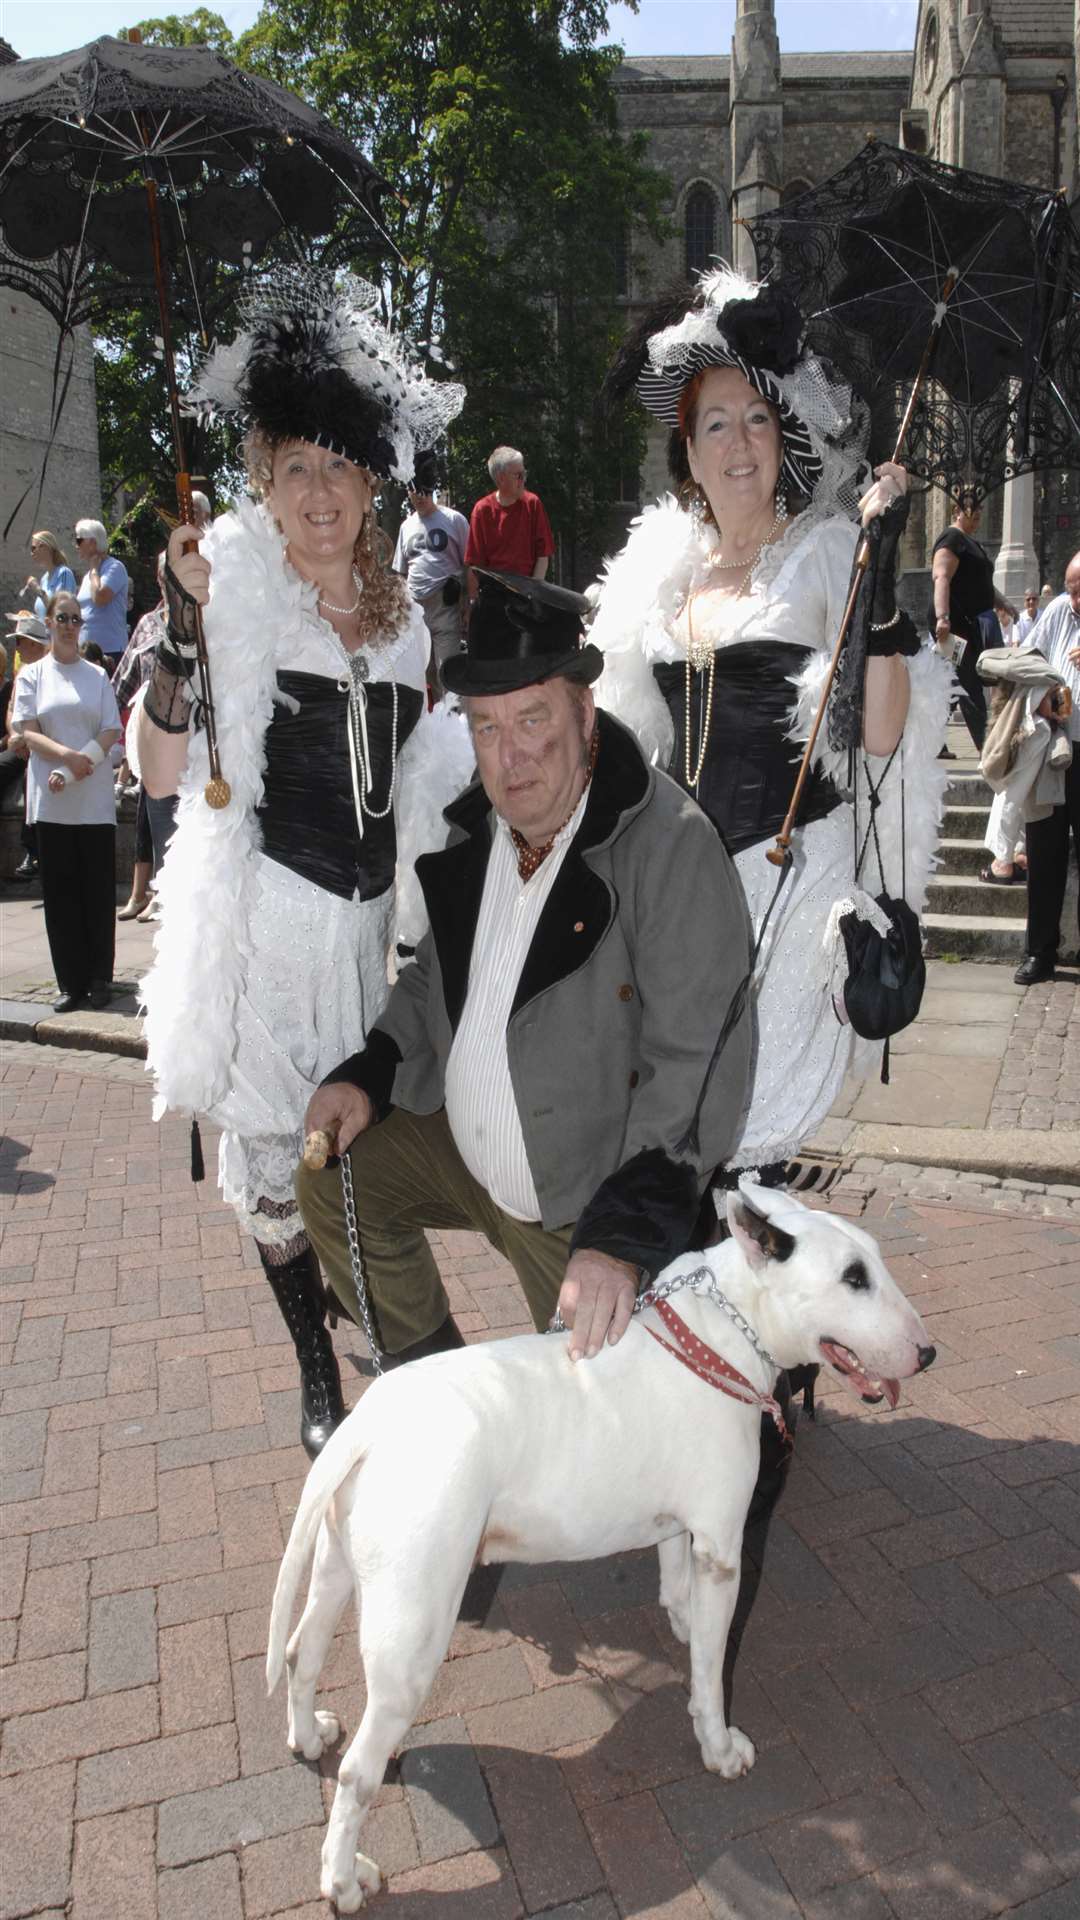 Bill King as Bill Sikes at the Dickens Festival